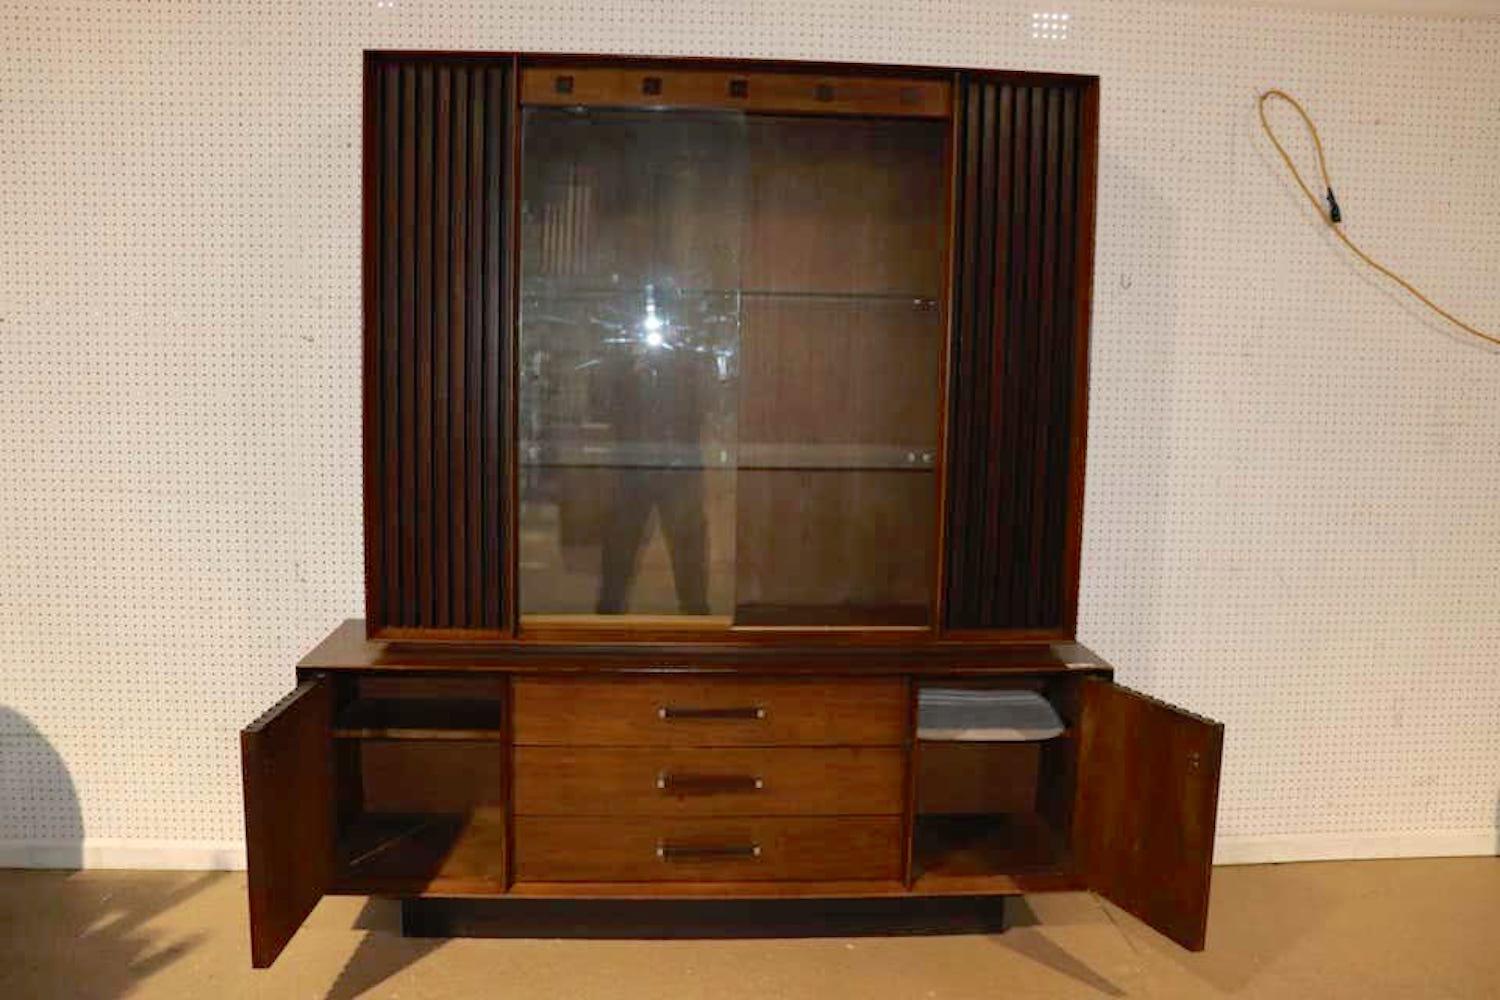 Large credenza with topper hutch unit by Lane. Rosewood and walnut combine with glass front doors for a stunning living room cabinet unit.
(Please confirm item location - NY or NJ - with dealer).
   